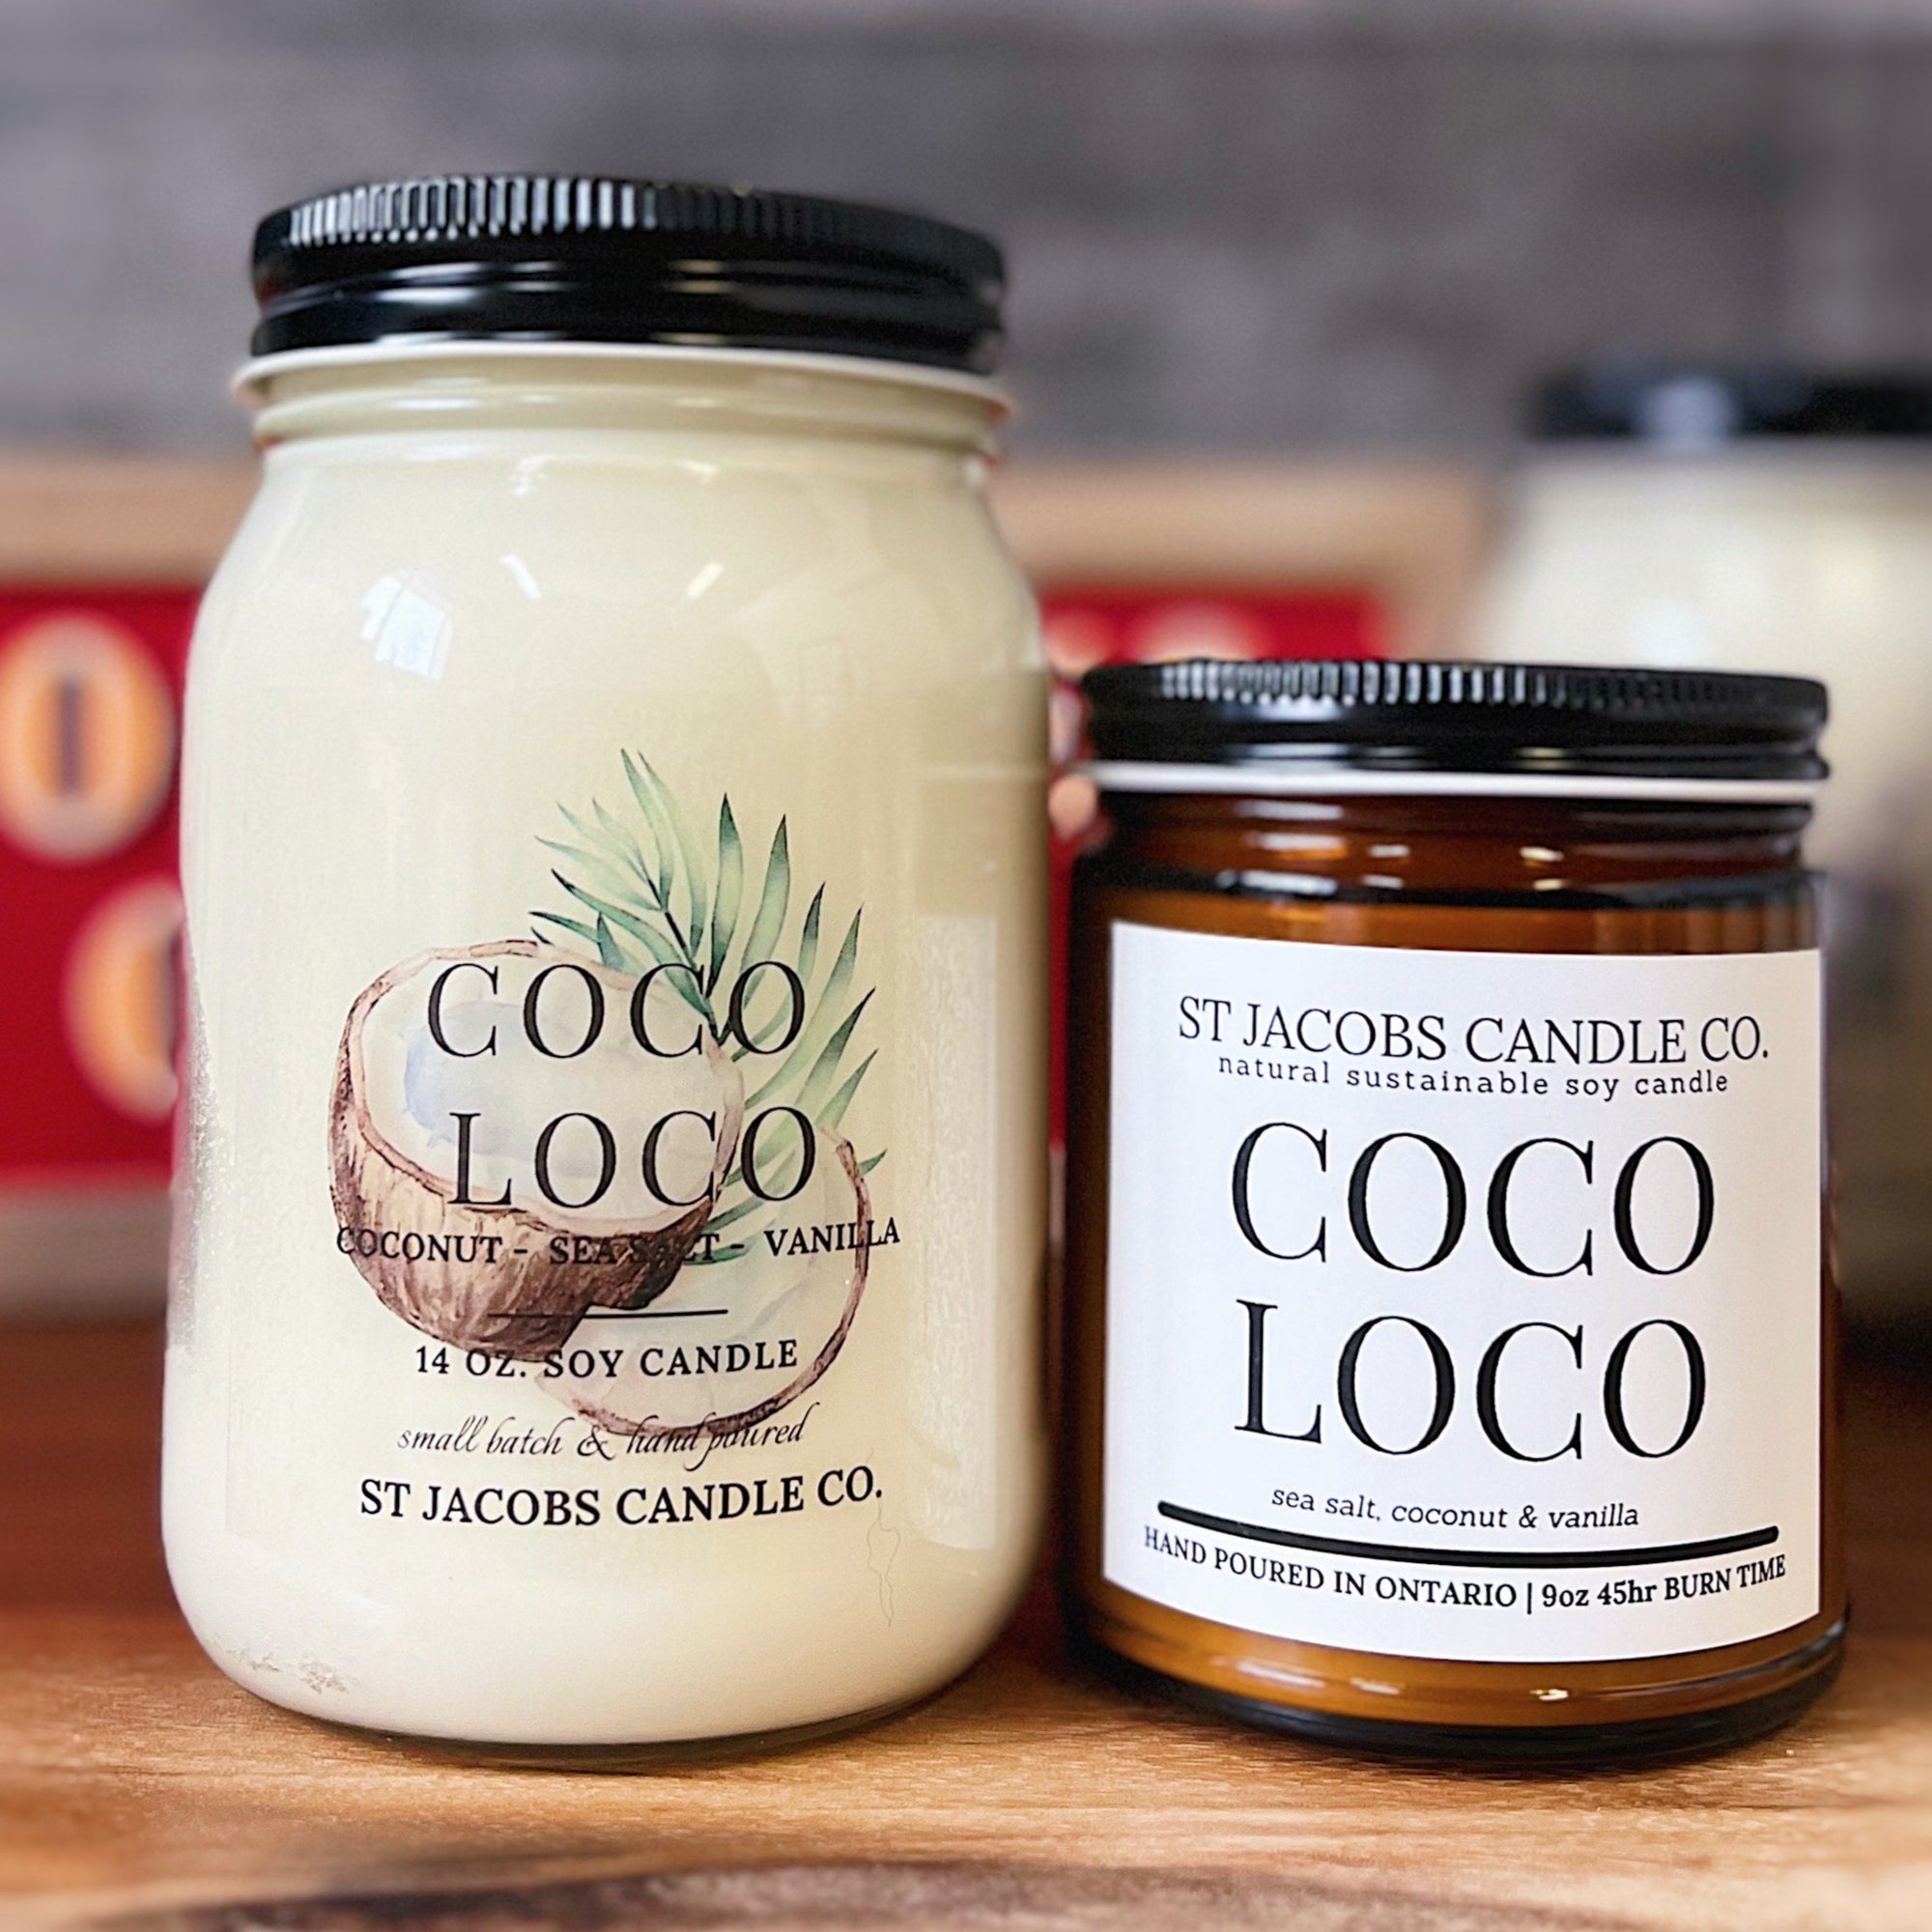 "COCO LOCO" Natural Soy Candle